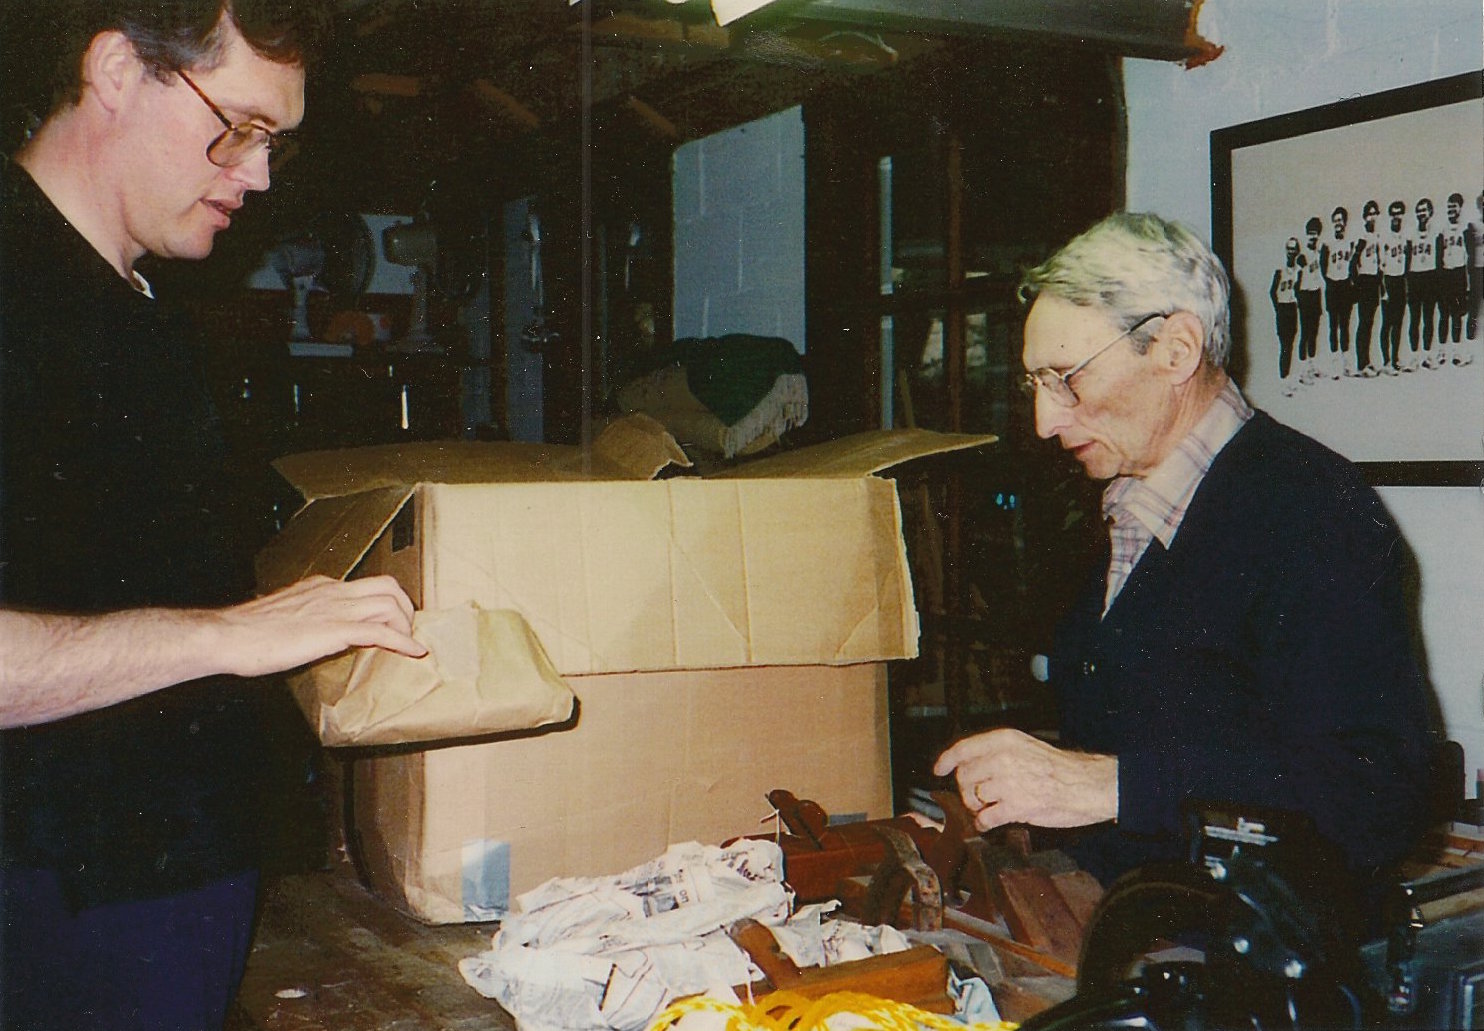 Wendall and me unwrapping some planes I had in WI